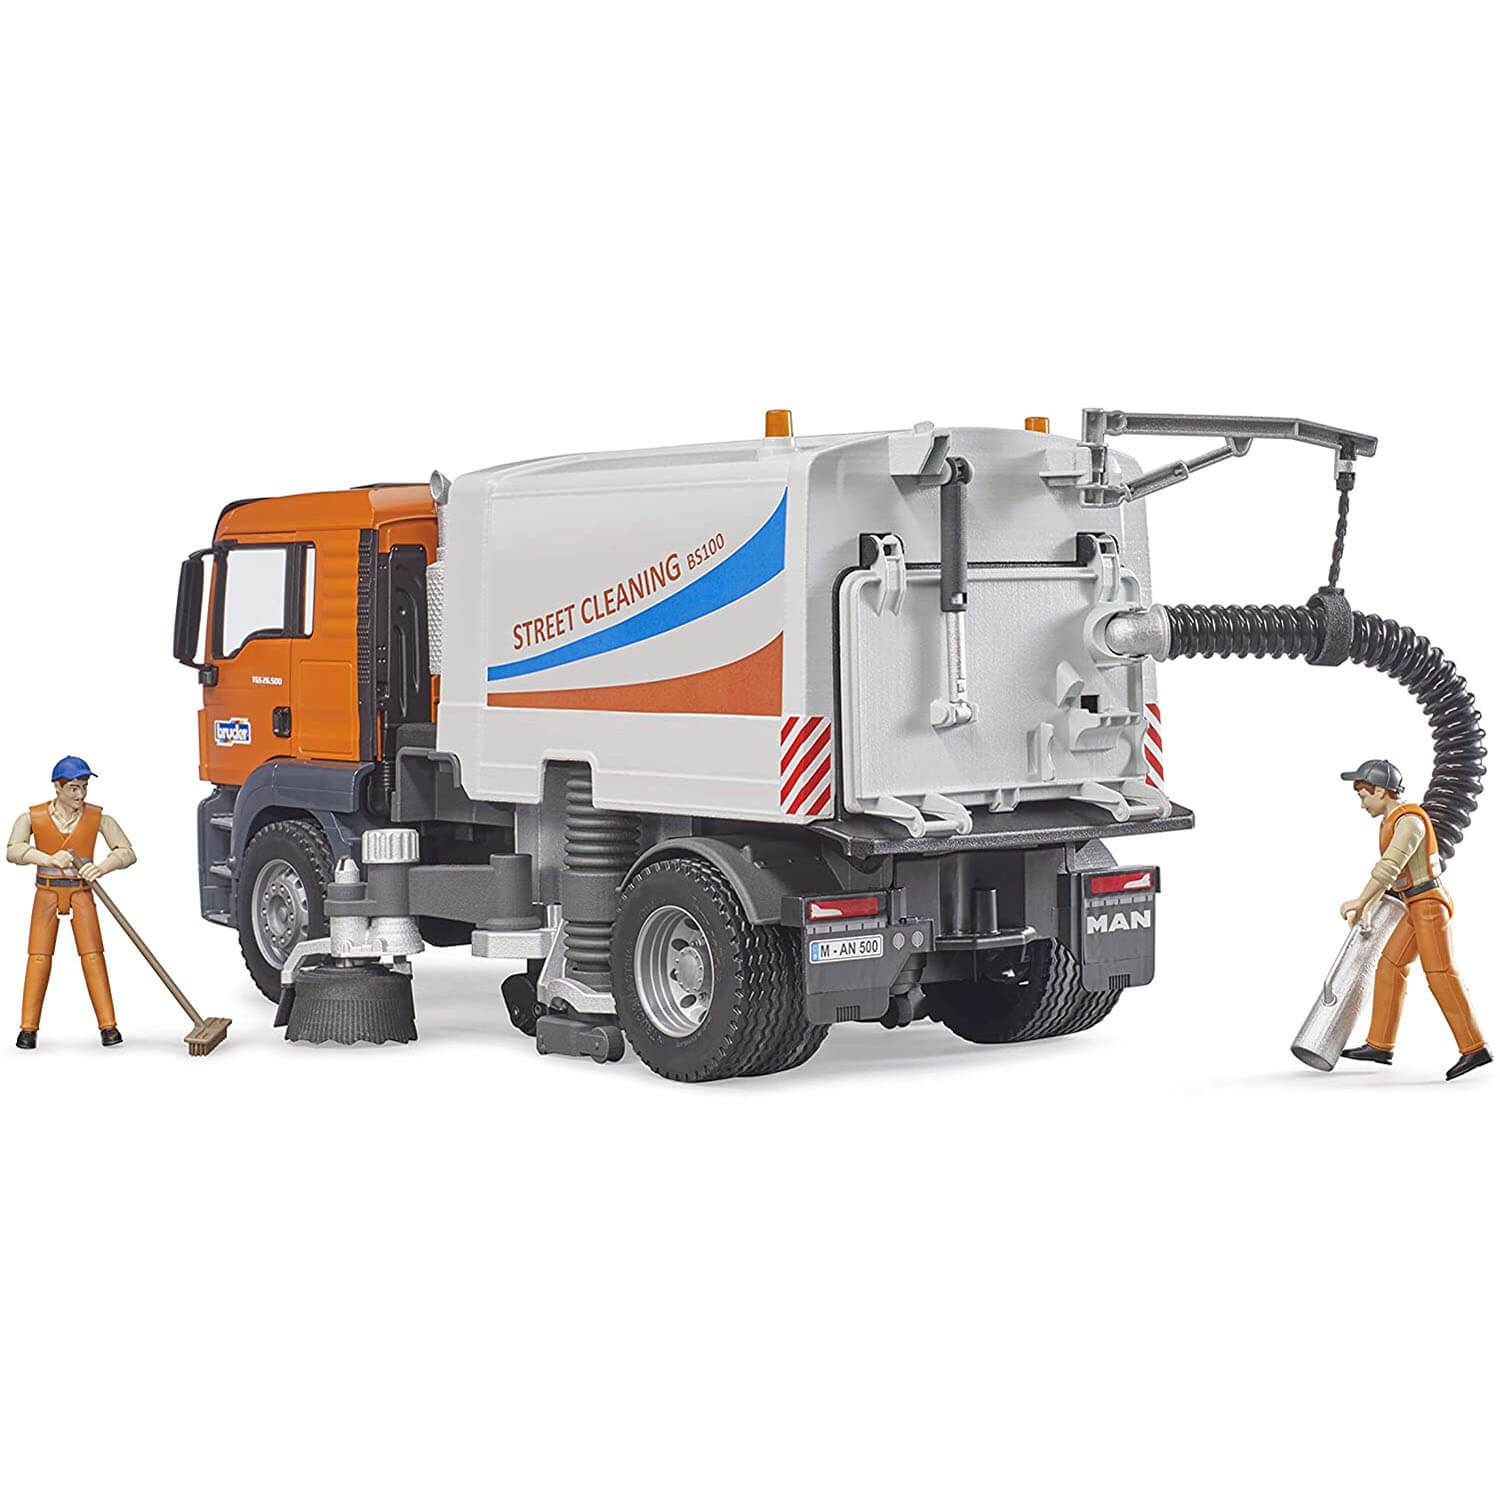 Refuse is down on this rear quarter angle of the Bruder MAN street sweeper. Also features 2 bworld figures (not included).